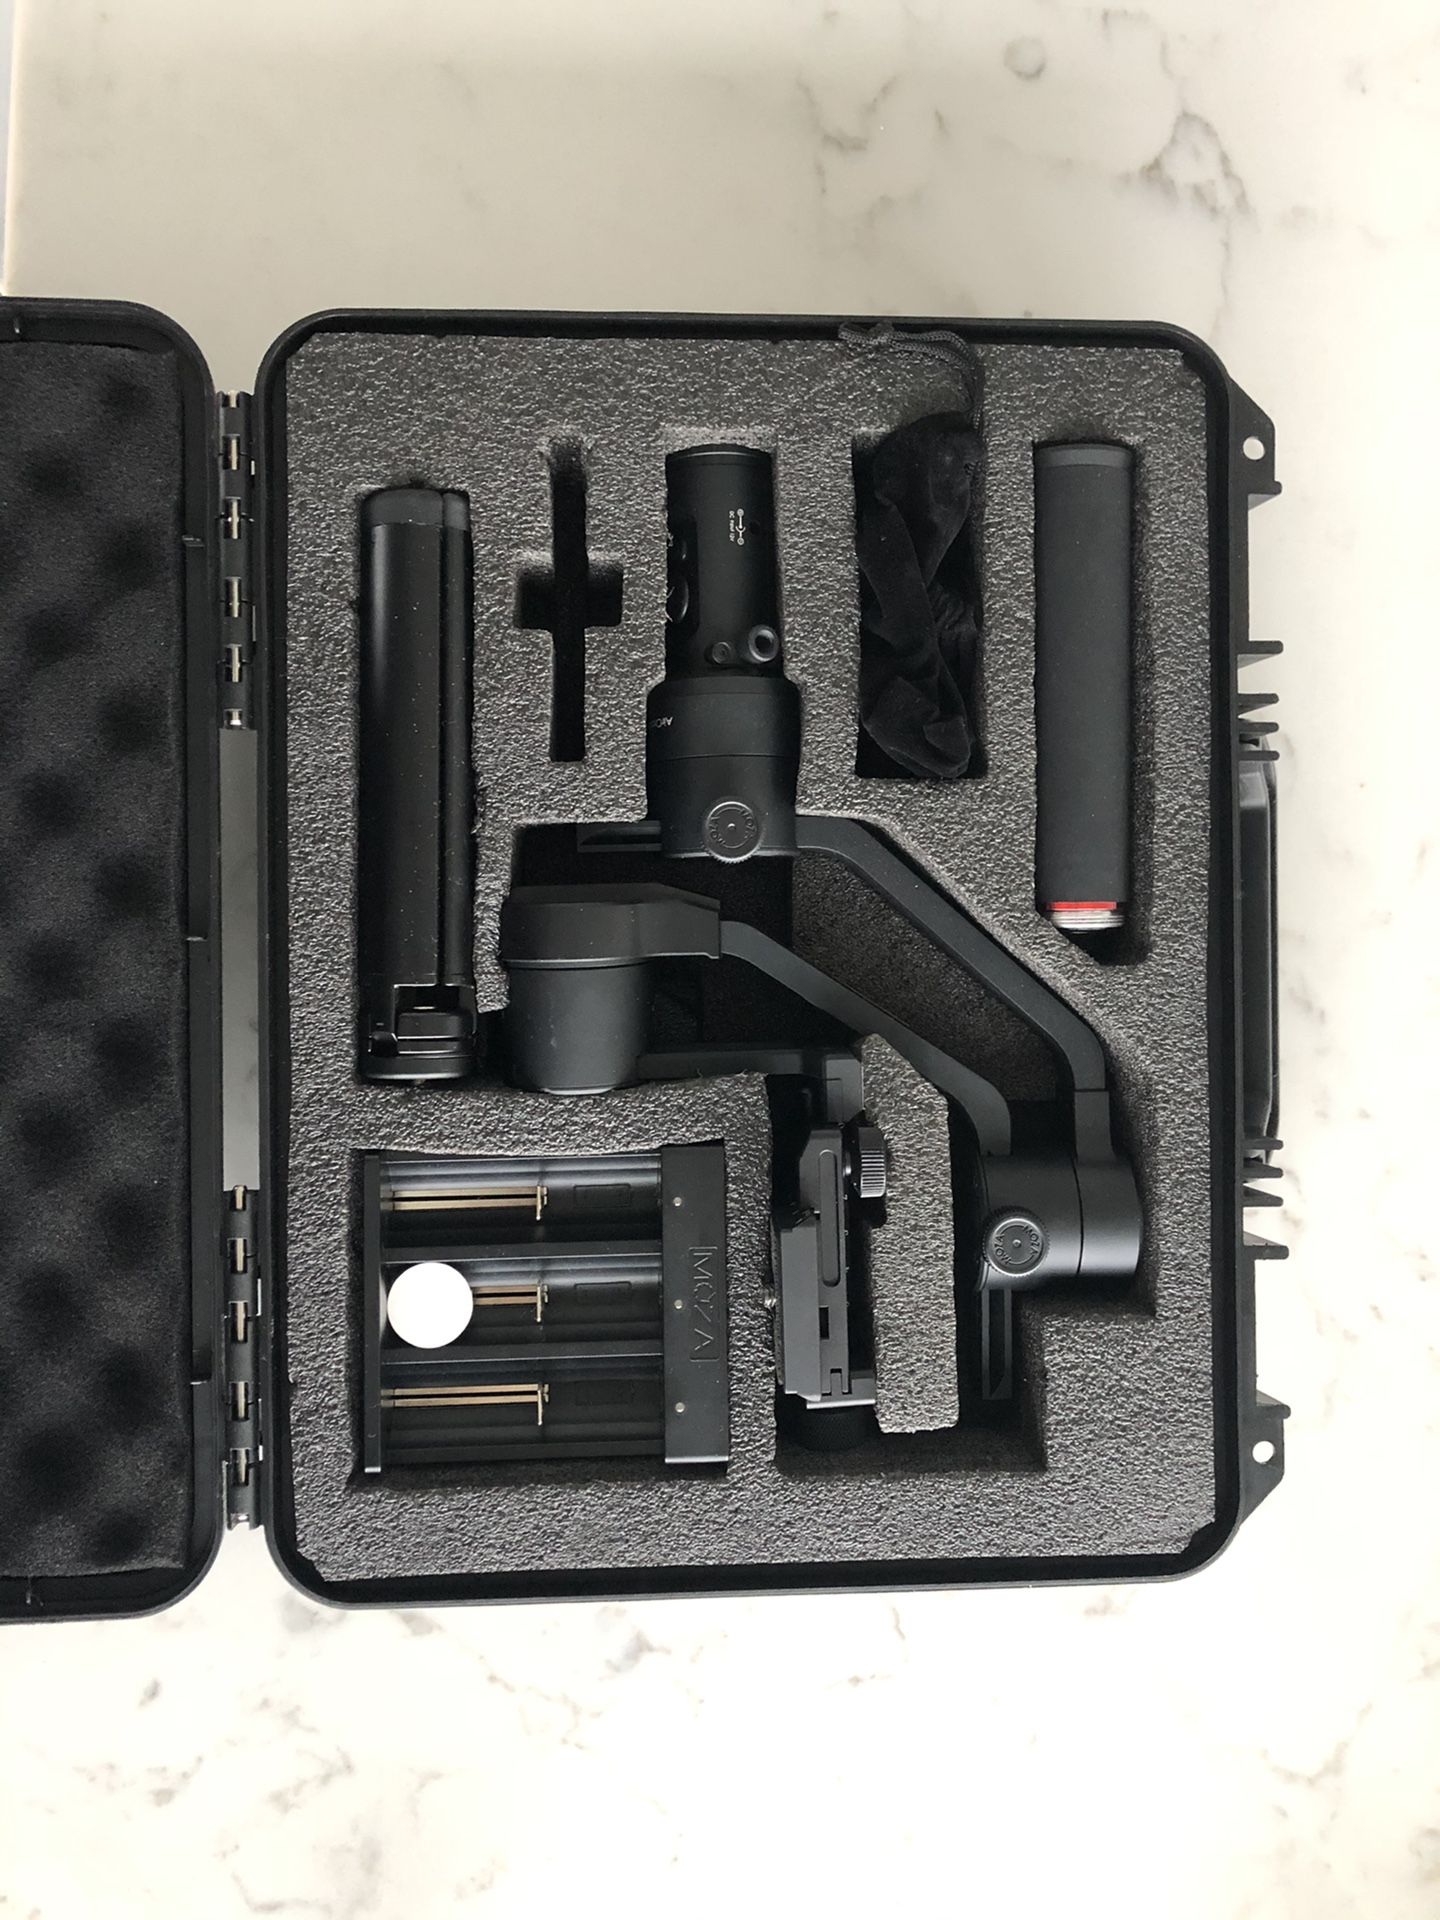 Moza AirCross Kit w/ Tripod, Gimbal, Handgrip, Batteries, Charger, Quick Release Plate